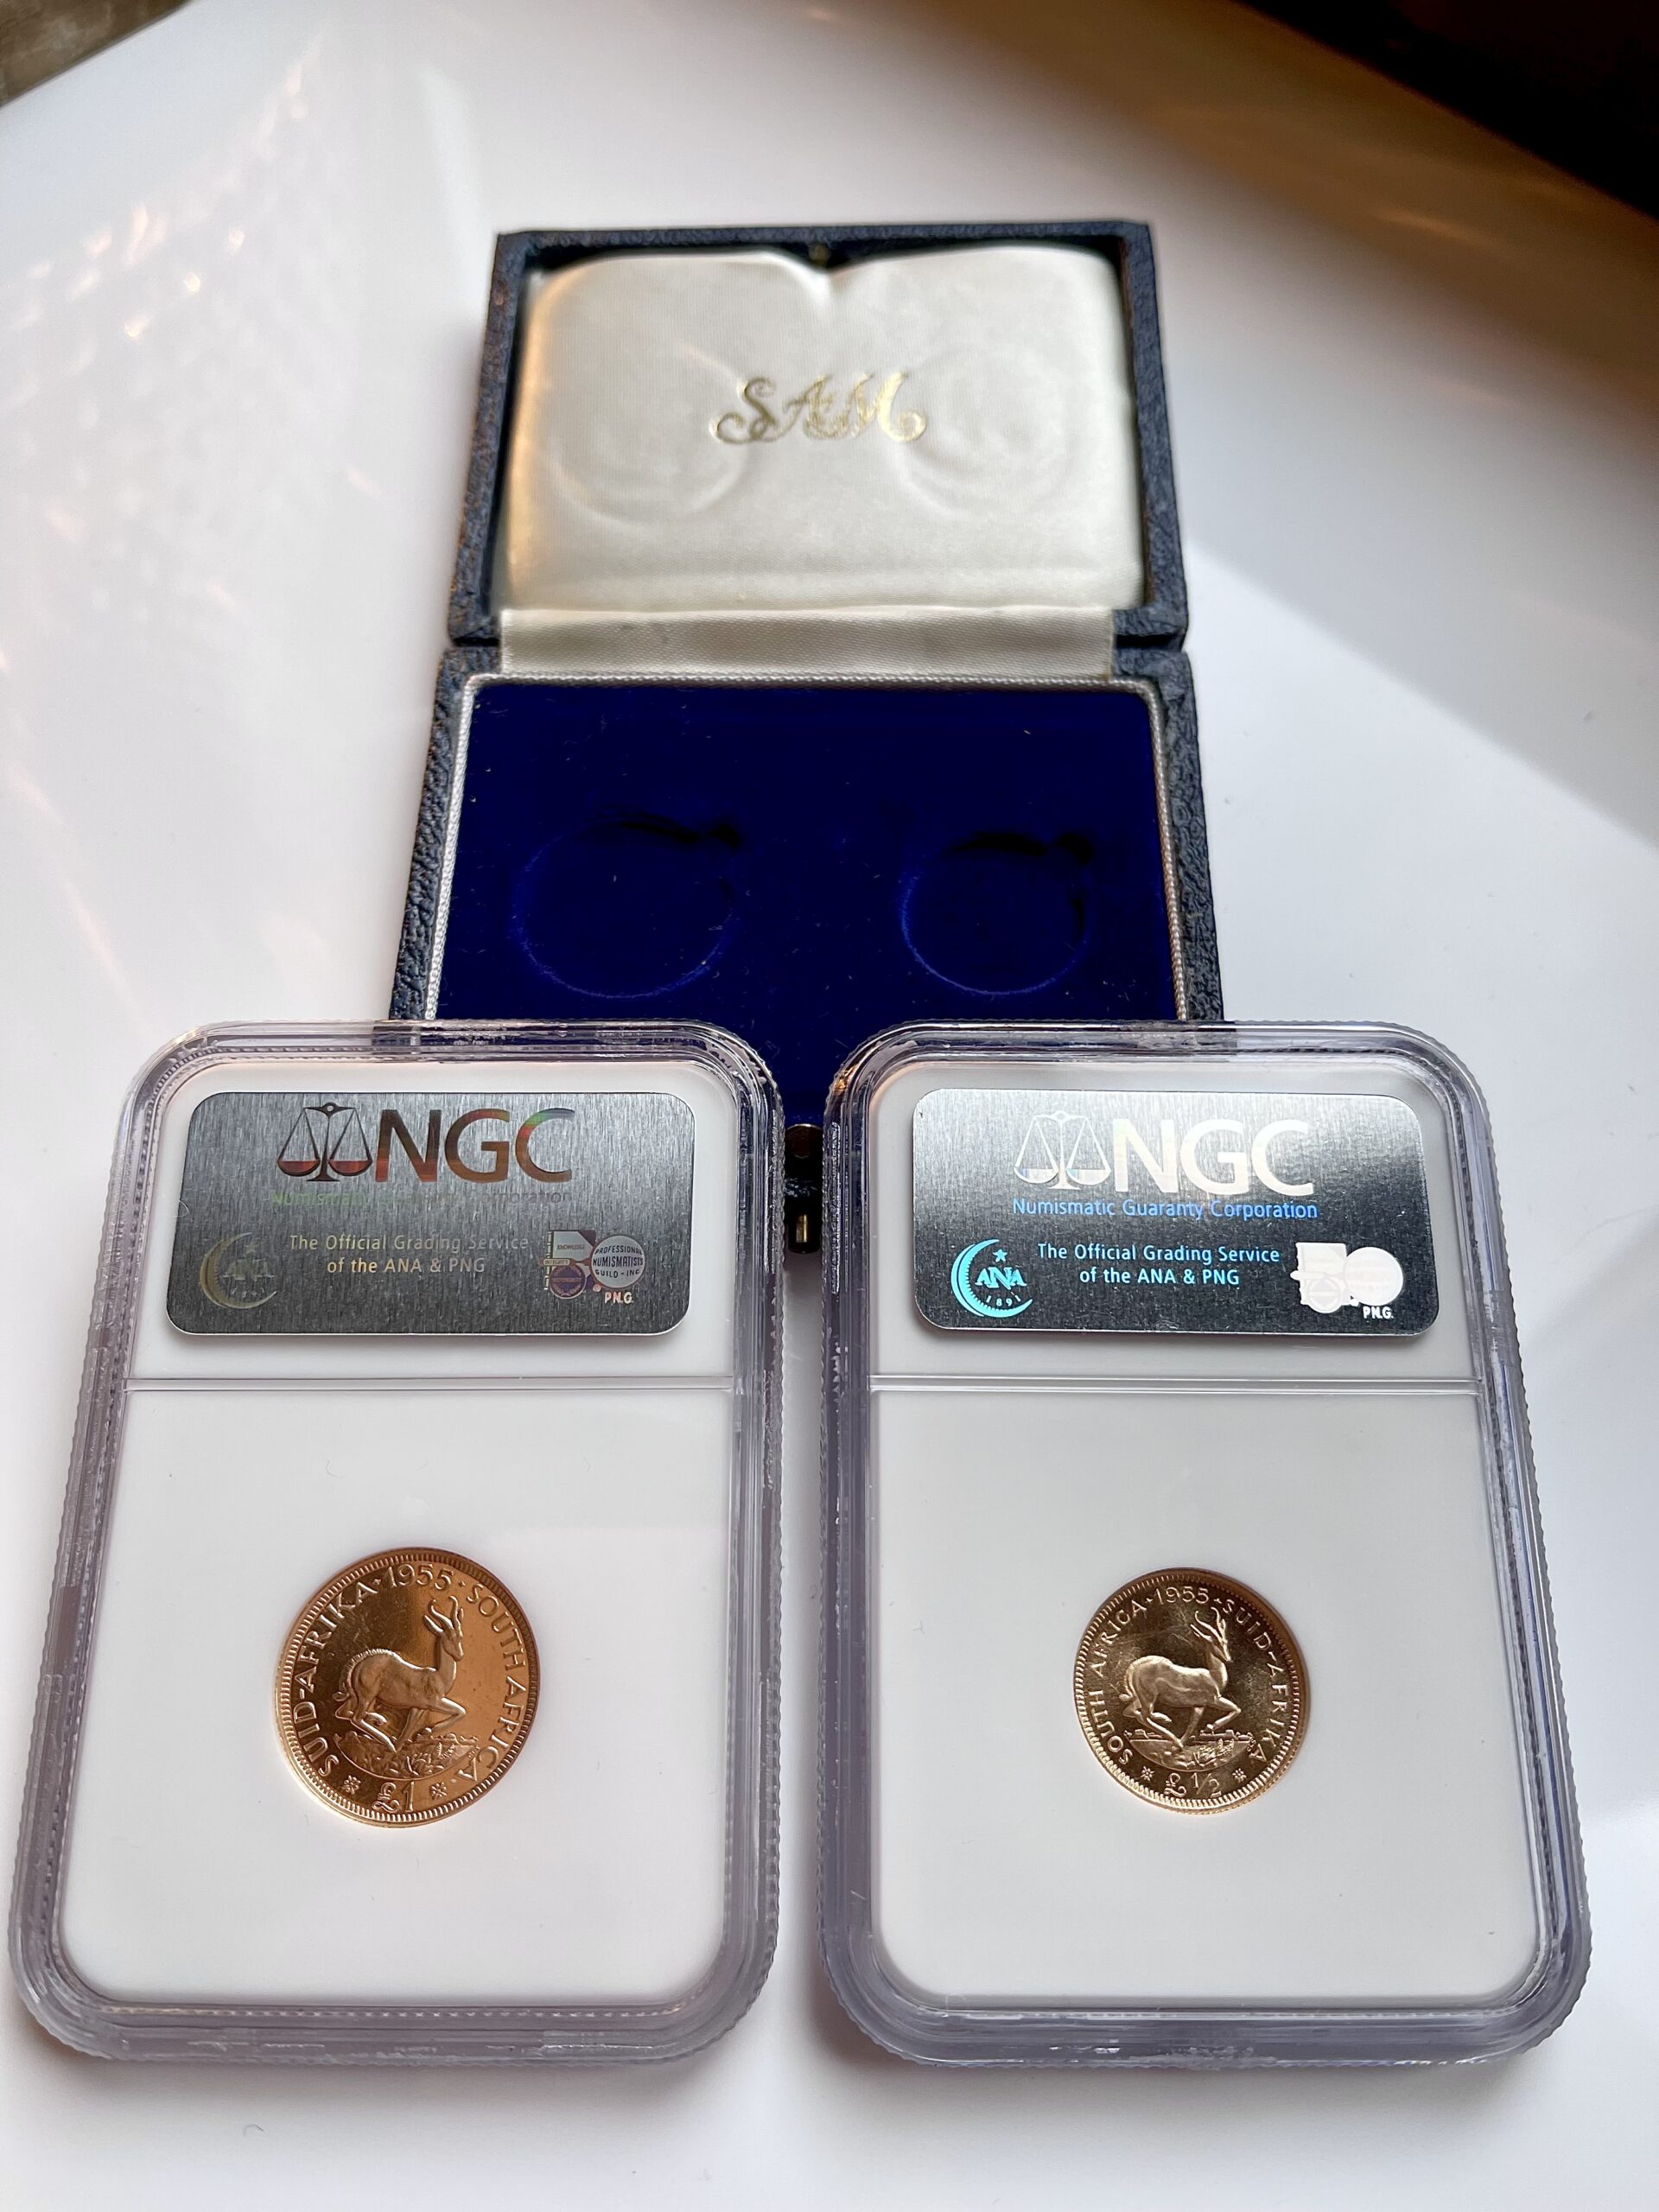 Mintages and worth of french €2 coins (UNC - BU - proof) - Numismag